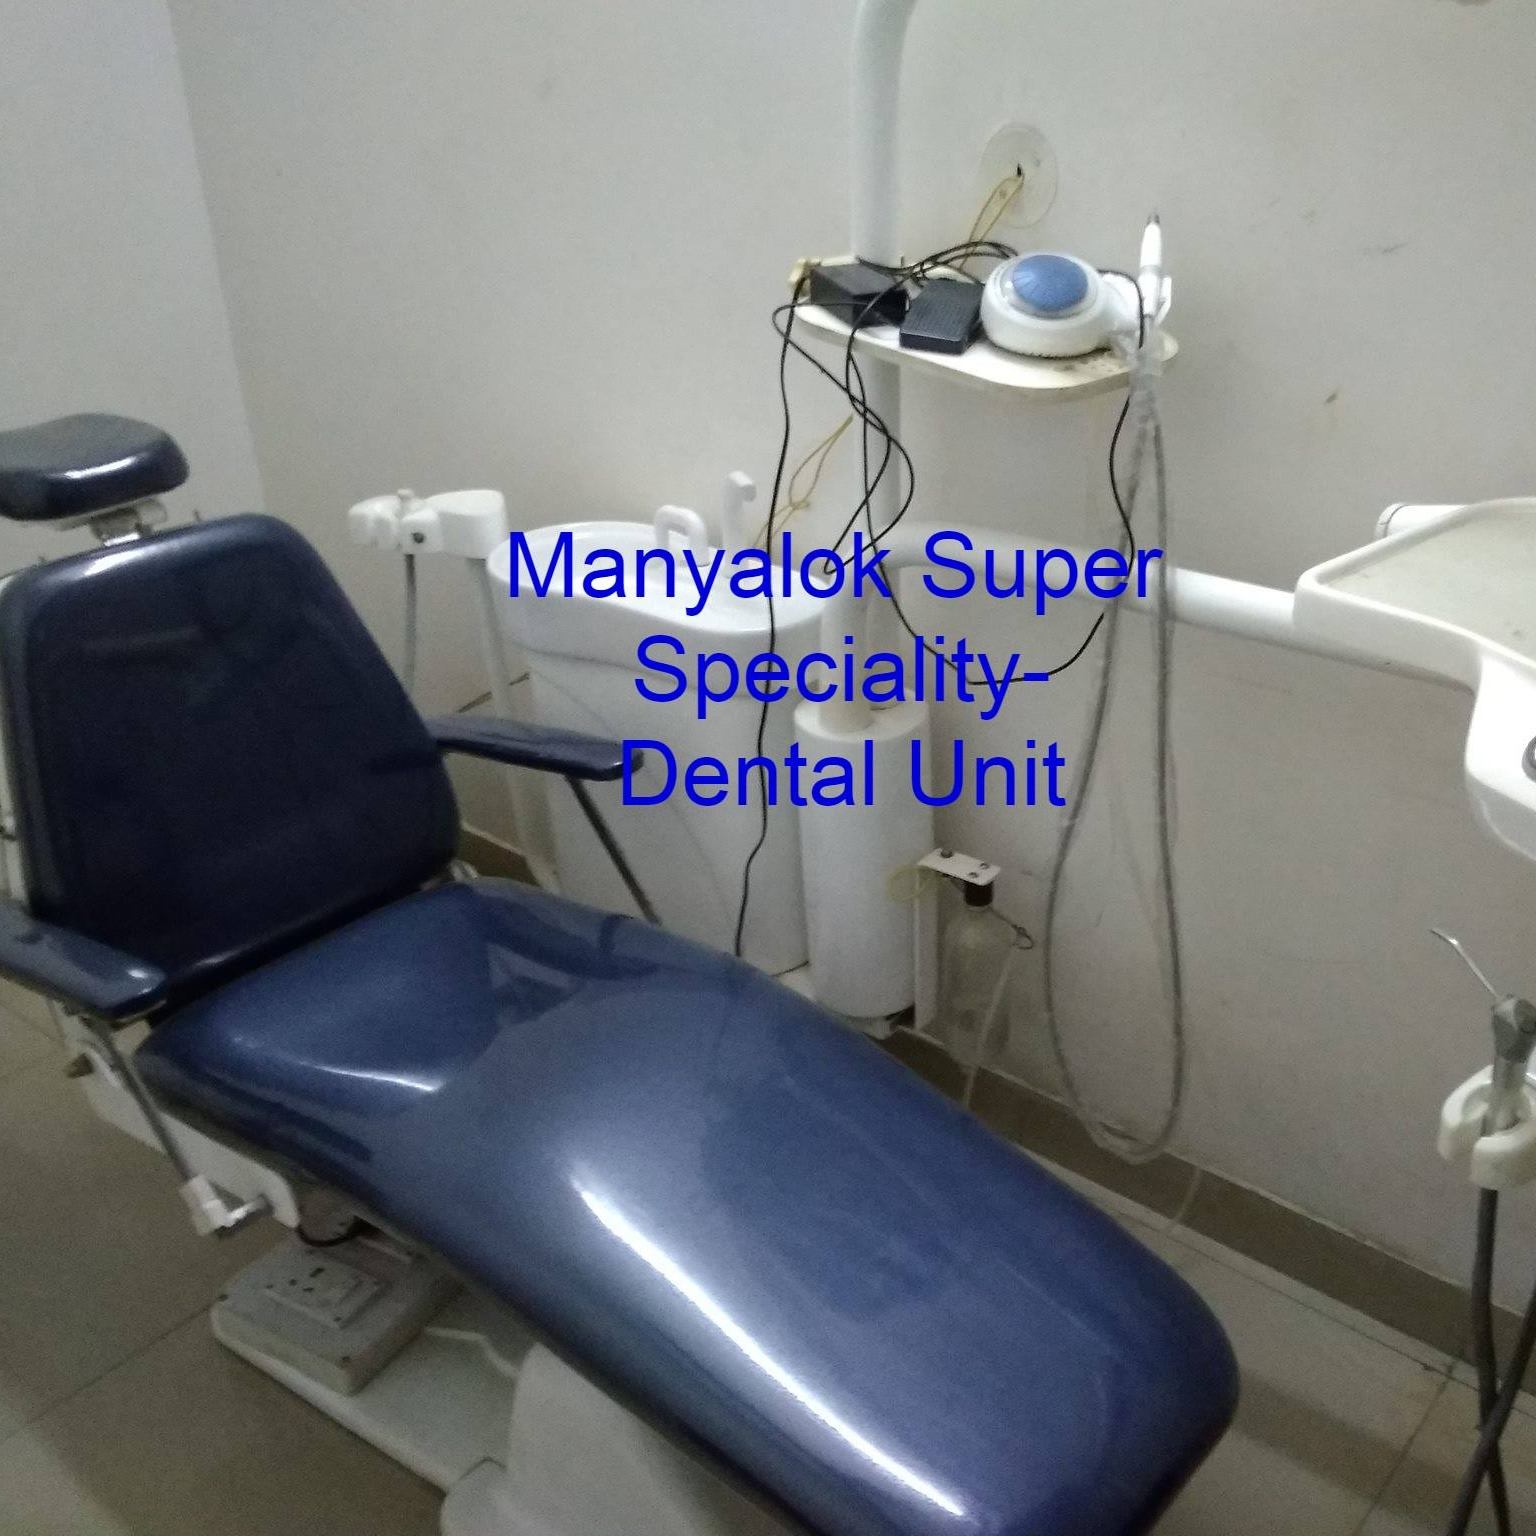 Manyalok Superspeciality - Orthodontics Implant & Pediatric Dentistry|Dentists|Medical Services